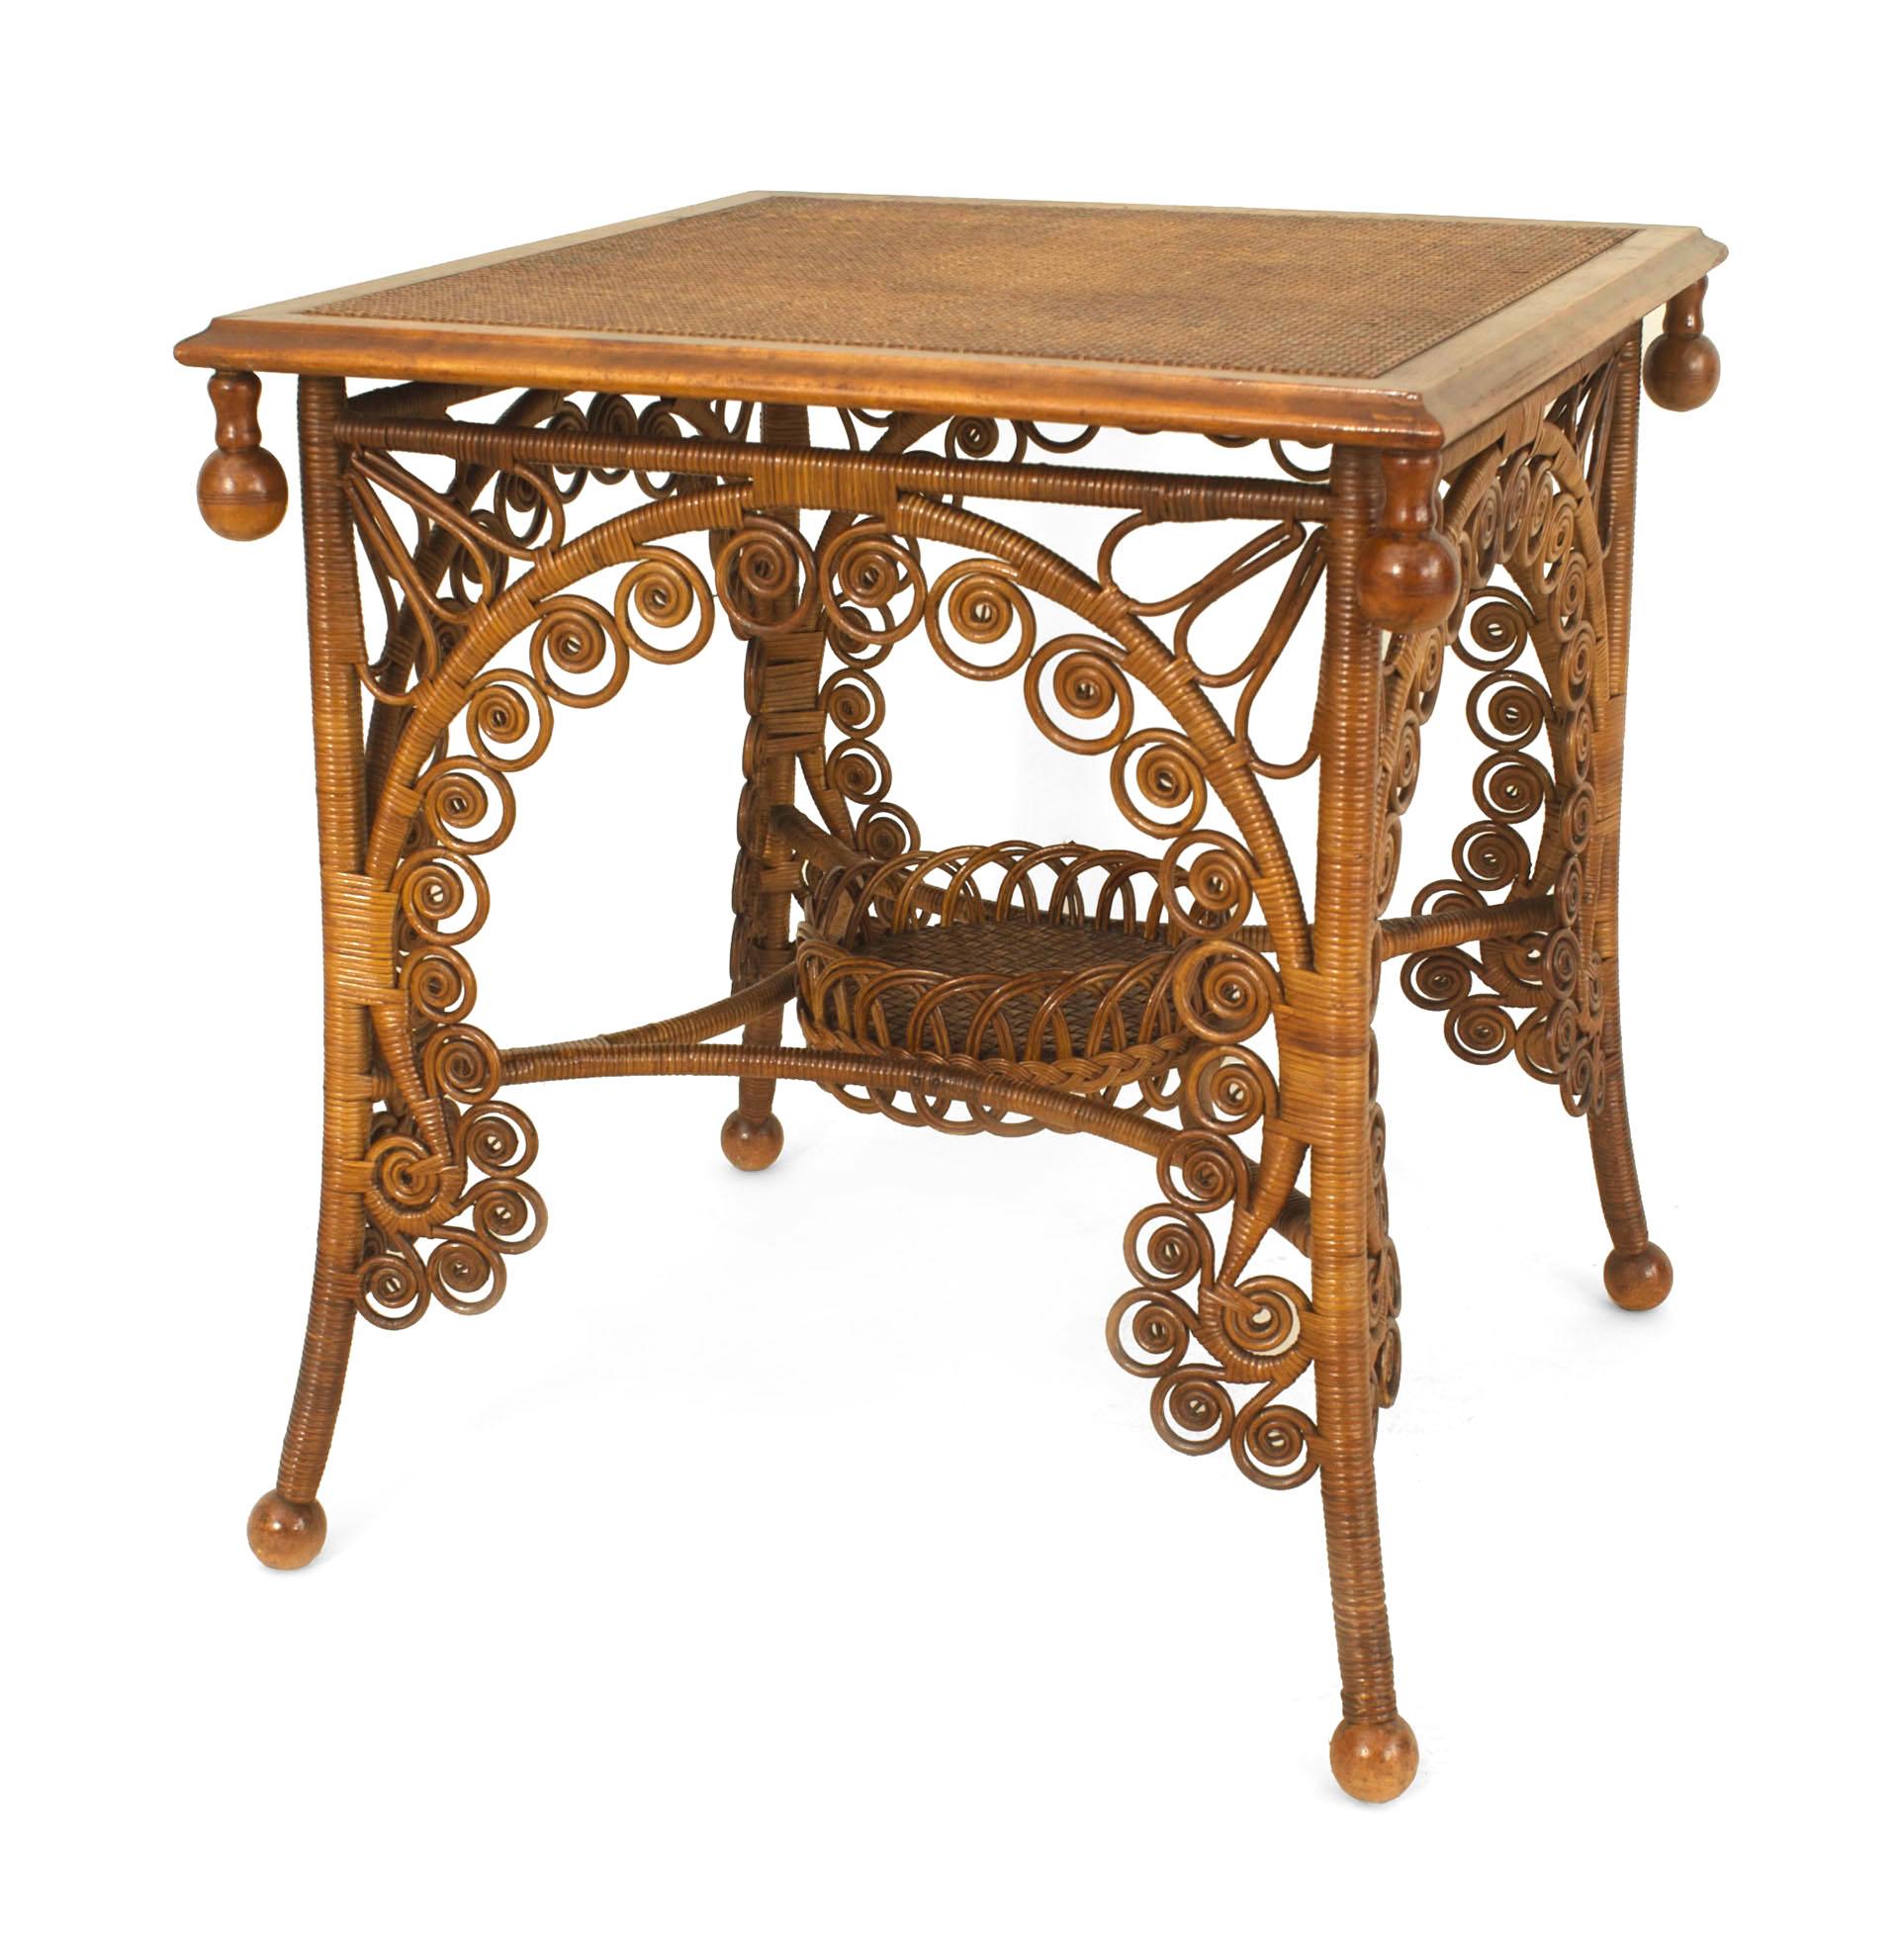 American Victorian natural wicker large square end table with a woven top resting on a four-legged base with multiple scroll design and a round stretcher shelf (Heywood Bros label).


Heywood Brothers was established in 1826, Wakefield Company in